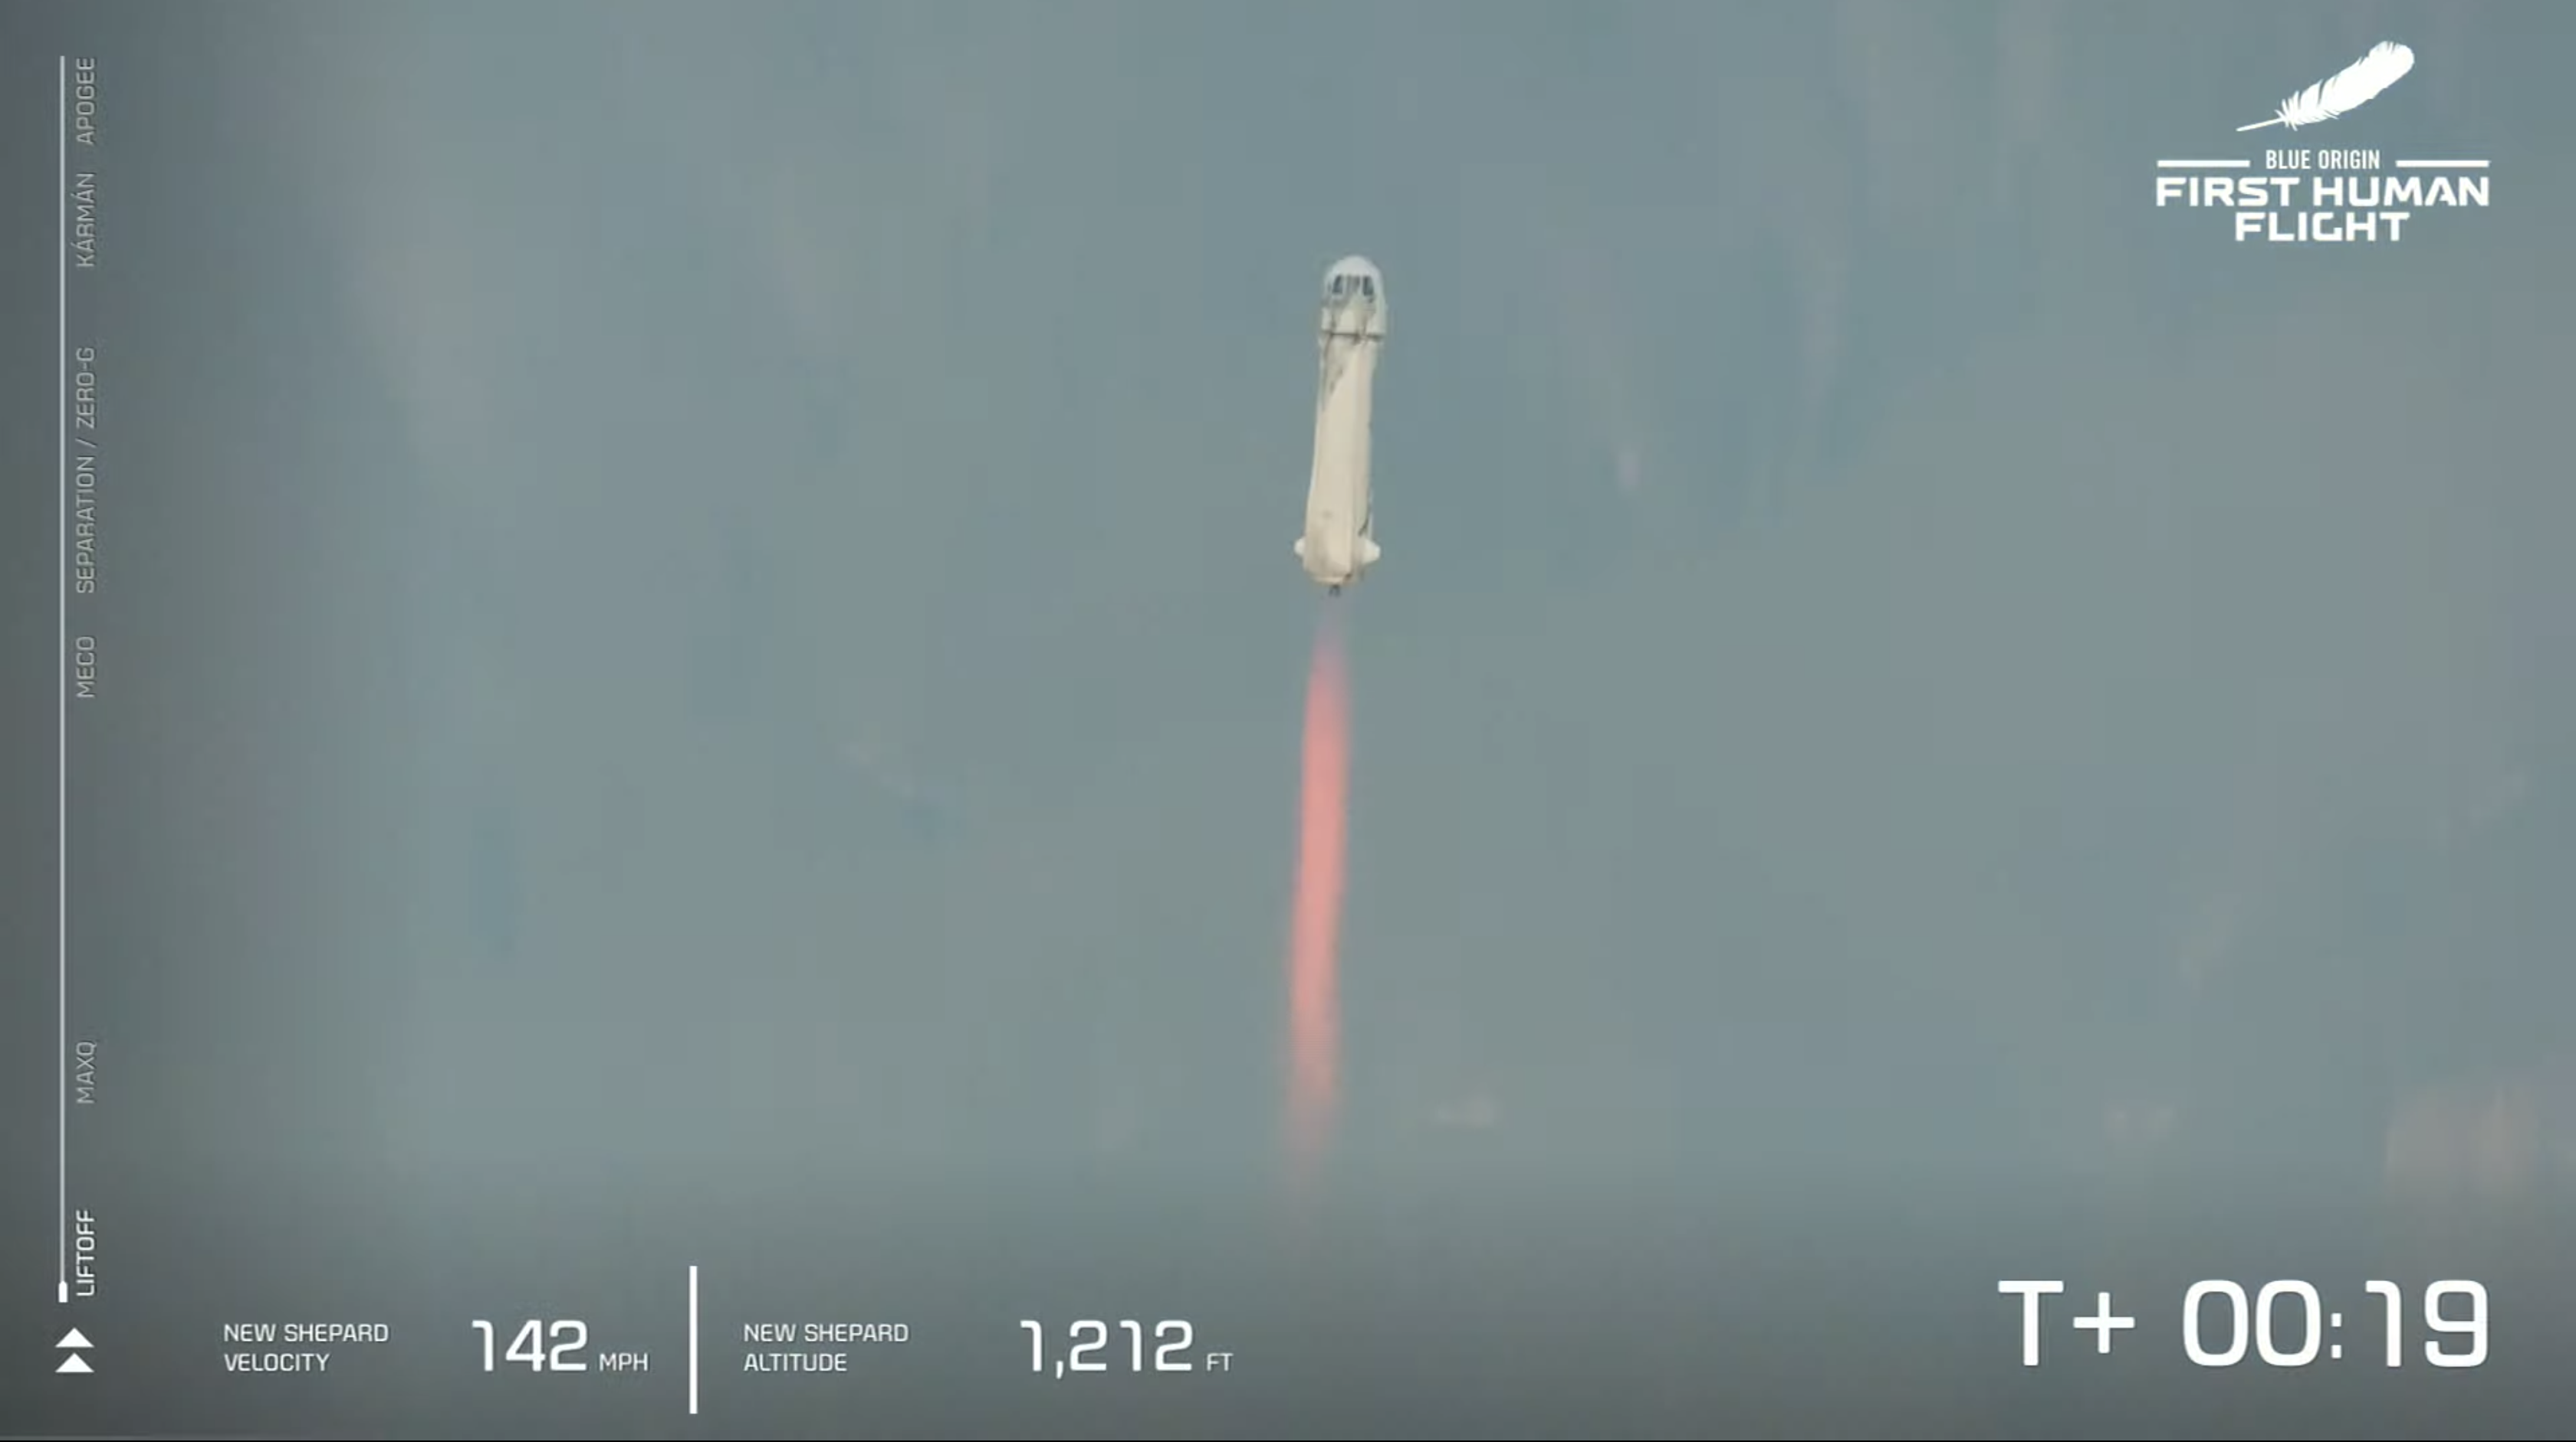 Blue Origin made history when four passengers, including Jeff Bezos, lifted off and made it to space aboard New Shepard.